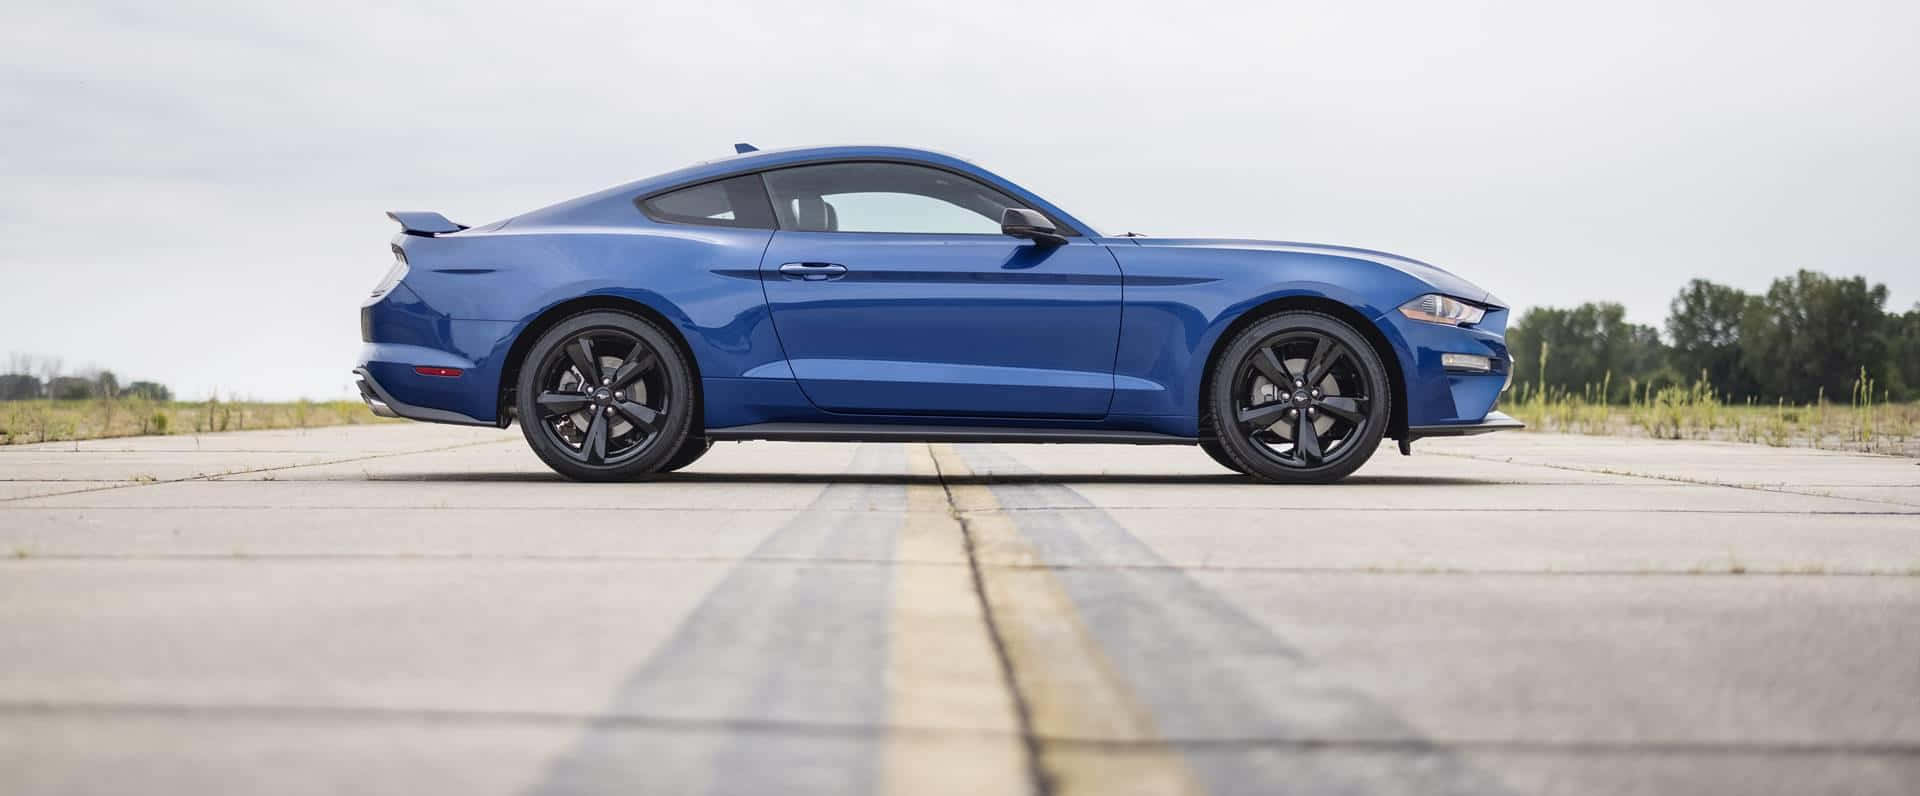 Stunning Ford Mustang California Special cruising down the road Wallpaper